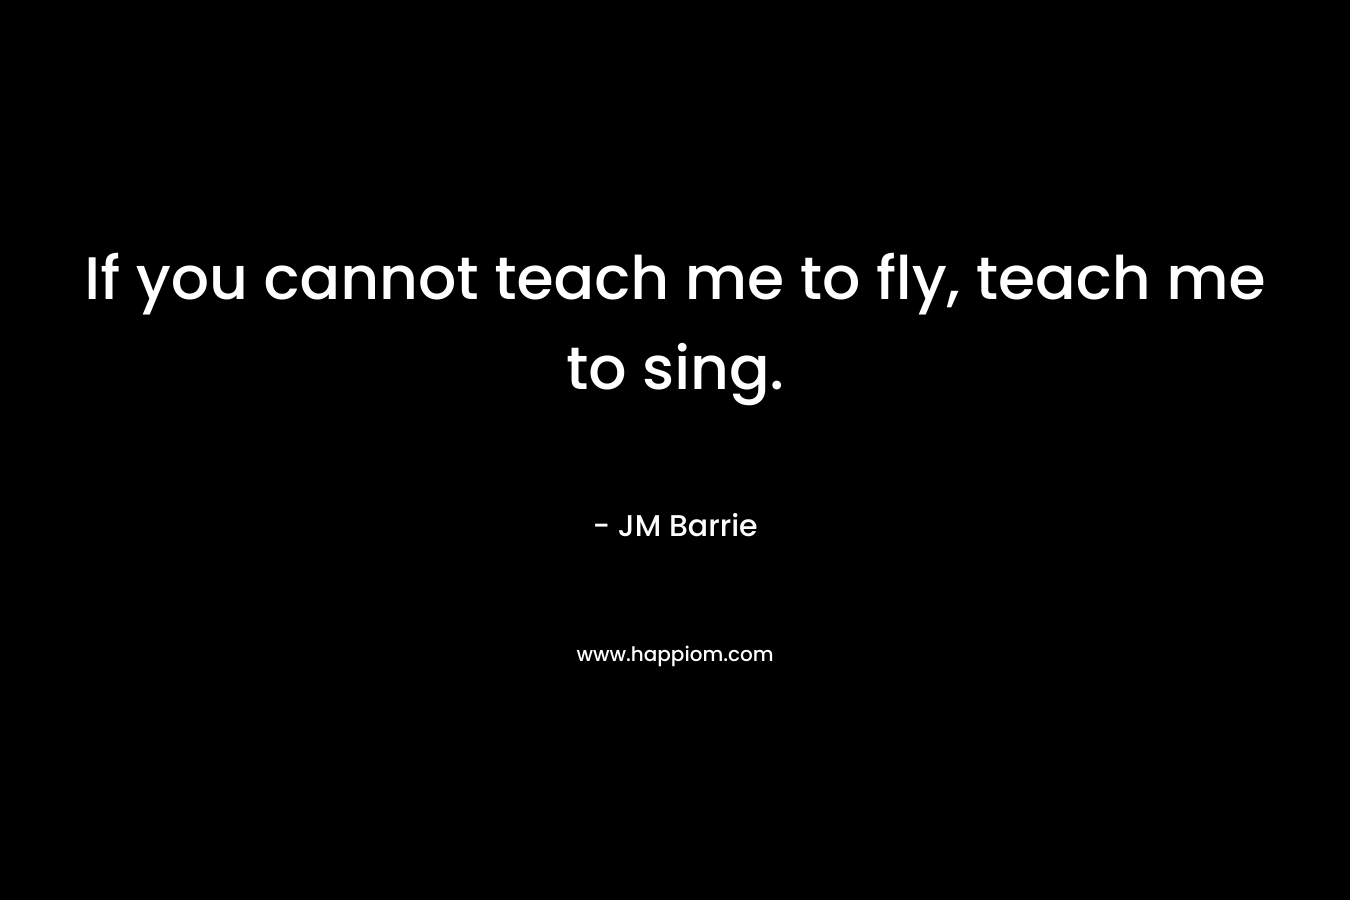 If you cannot teach me to fly, teach me to sing.